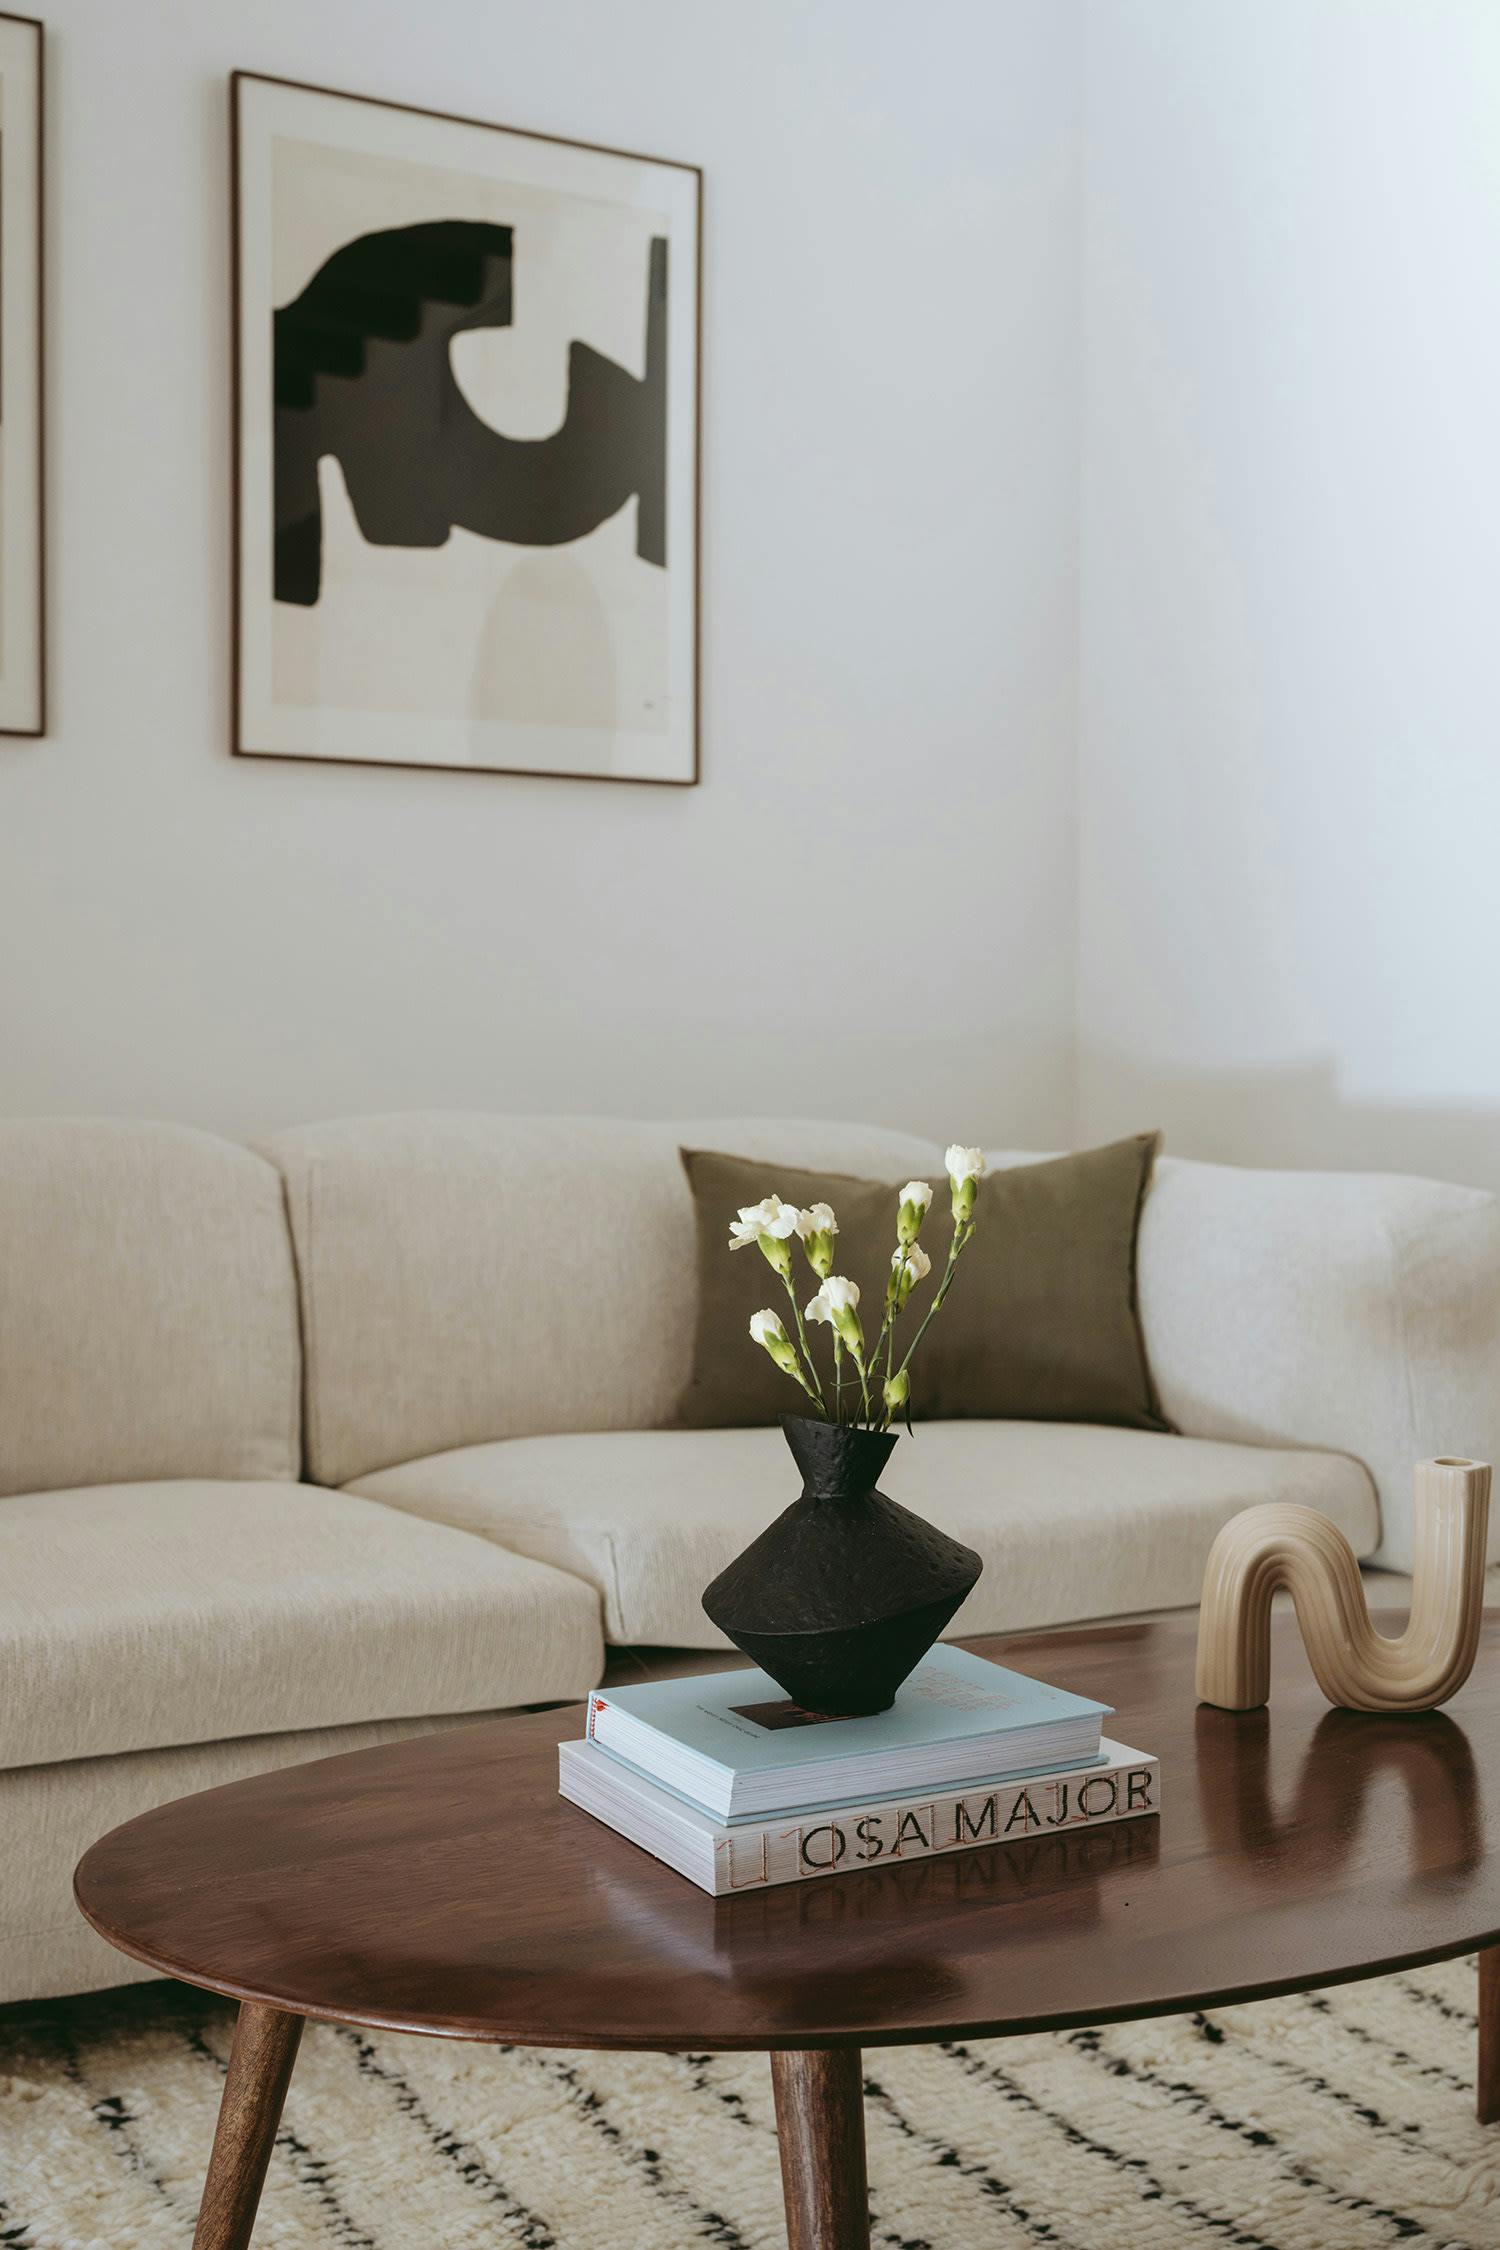 The image features a white living room with a couch, a coffee table, and a vase of flowers.